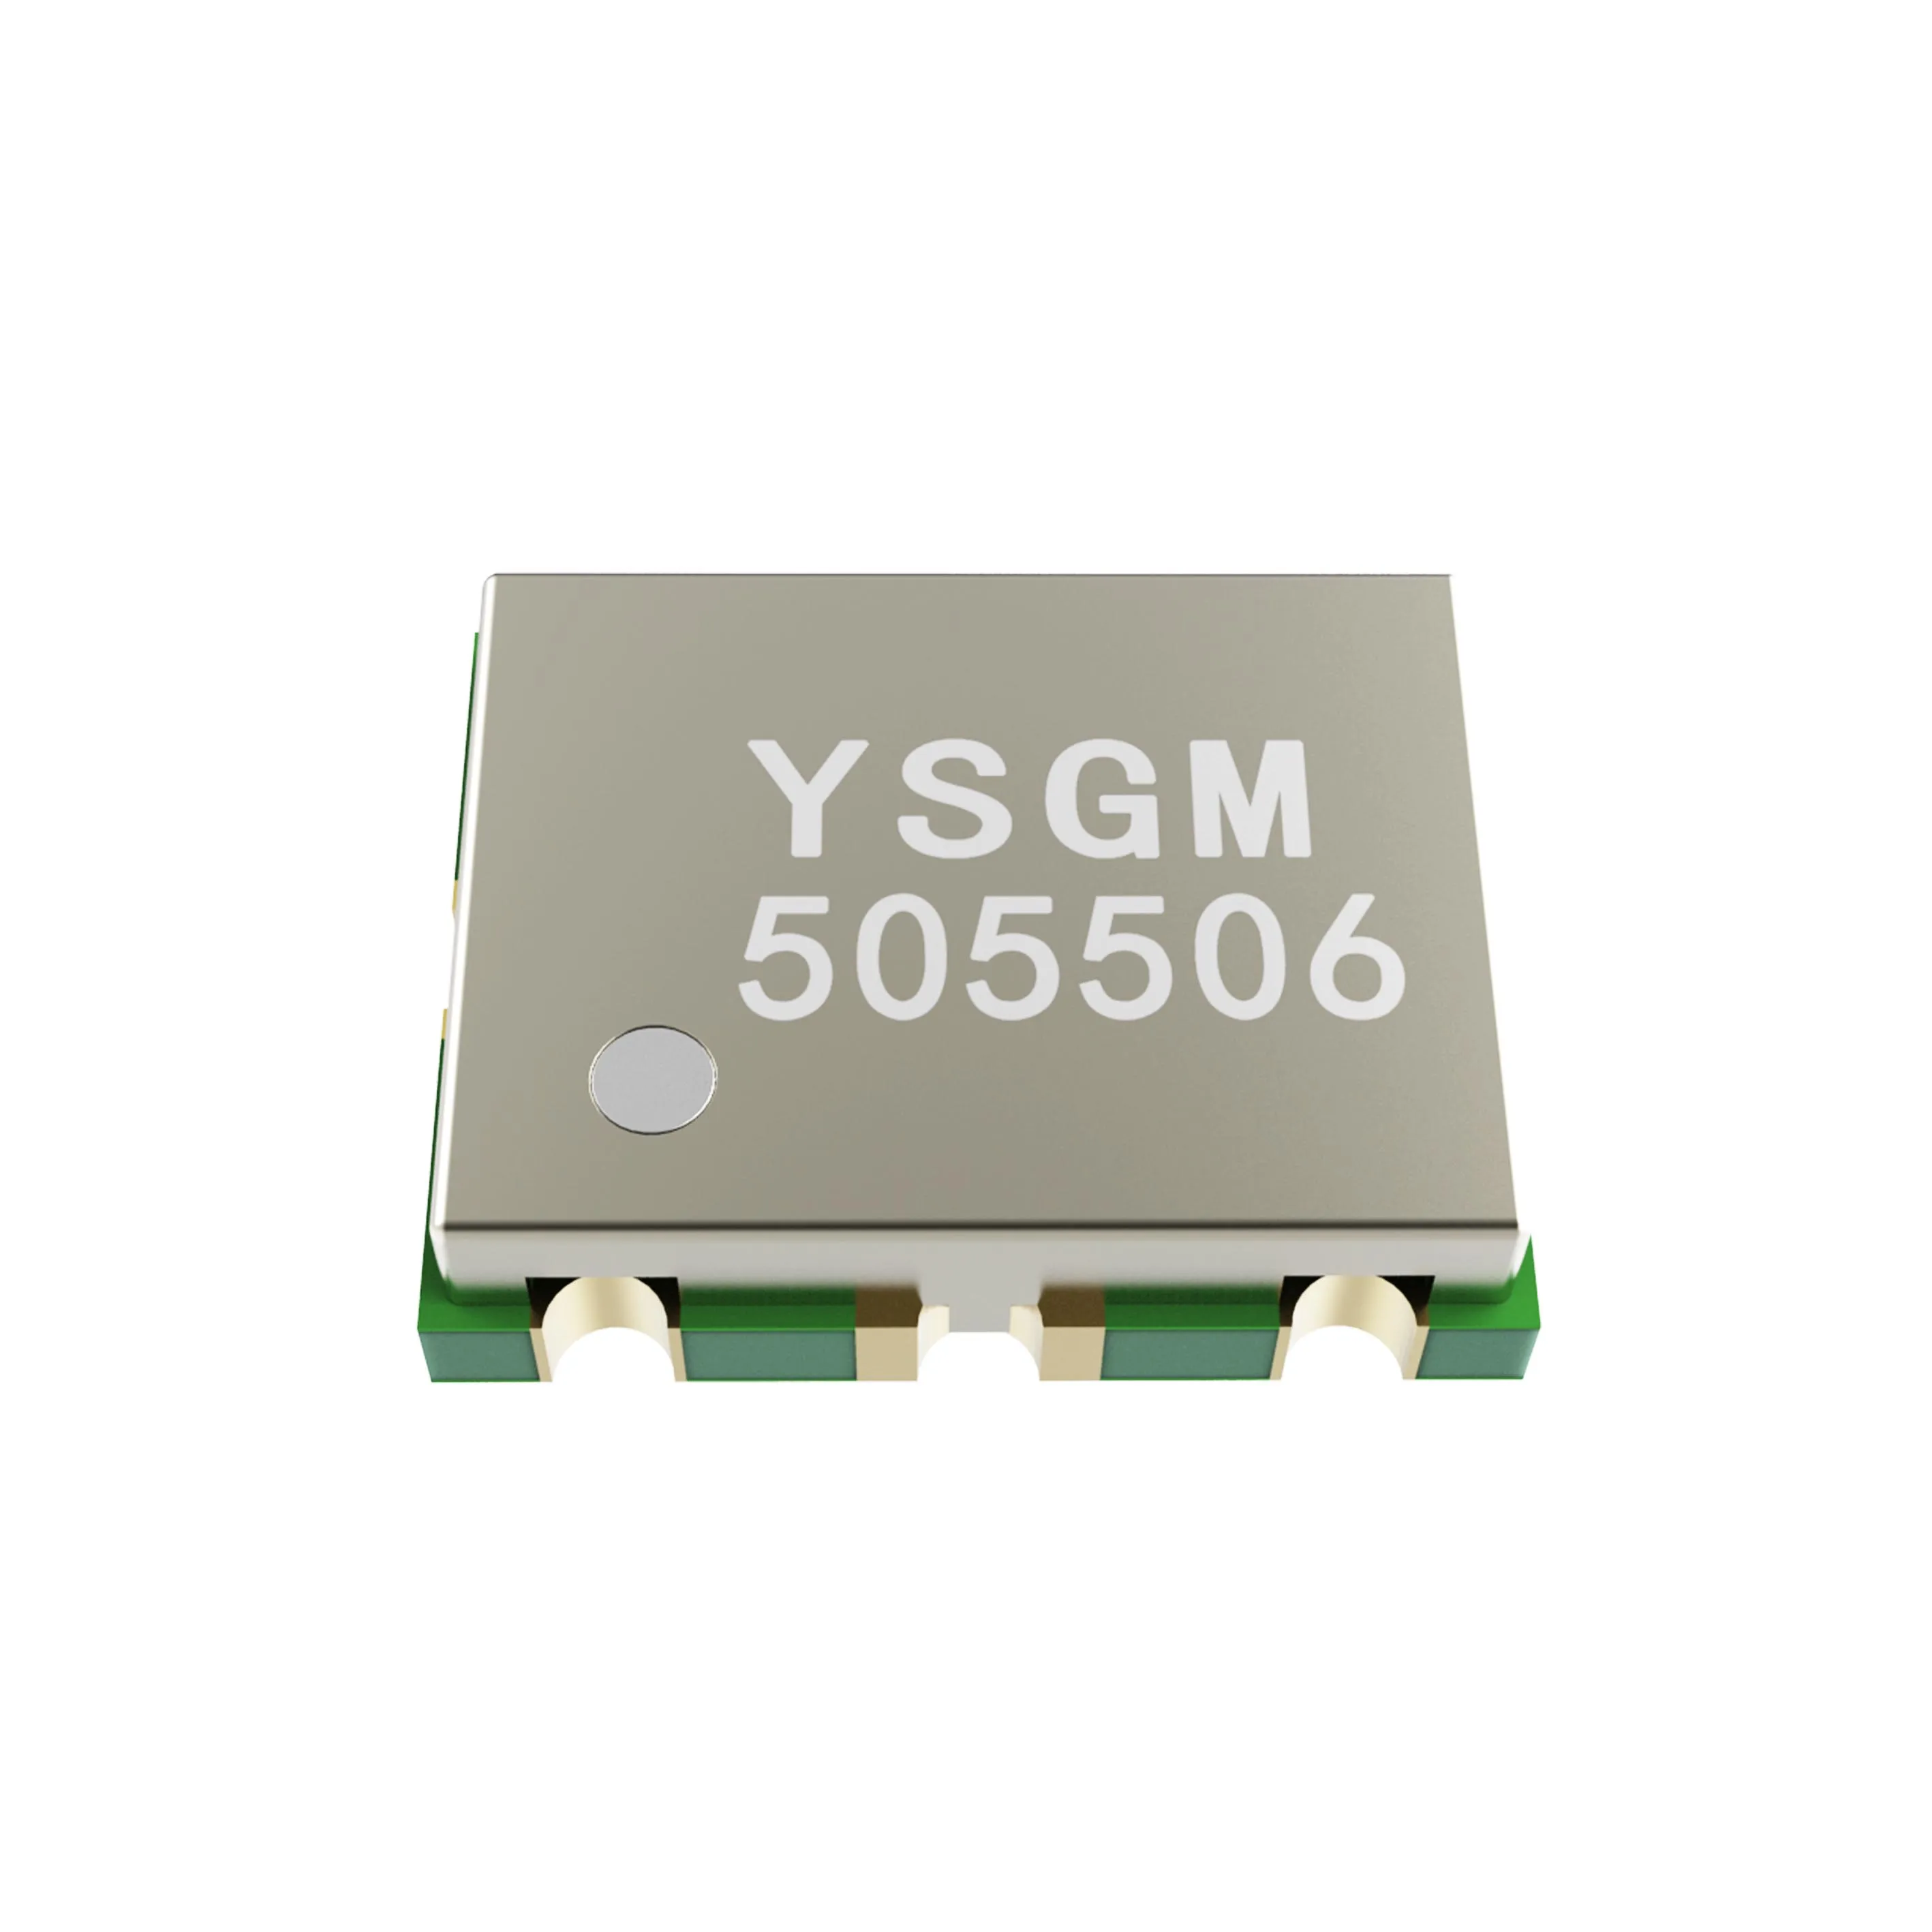 VCO Voltage Controlled Oscillator with Buffer Amplifier for IEEE 802.11a/n/ac 5150MHz-5350MHz 1pcs lot hmc735lp5e hmc735 voltage controlled oscillator vco w divide by 4 10 5 12 2ghz qfn32 new